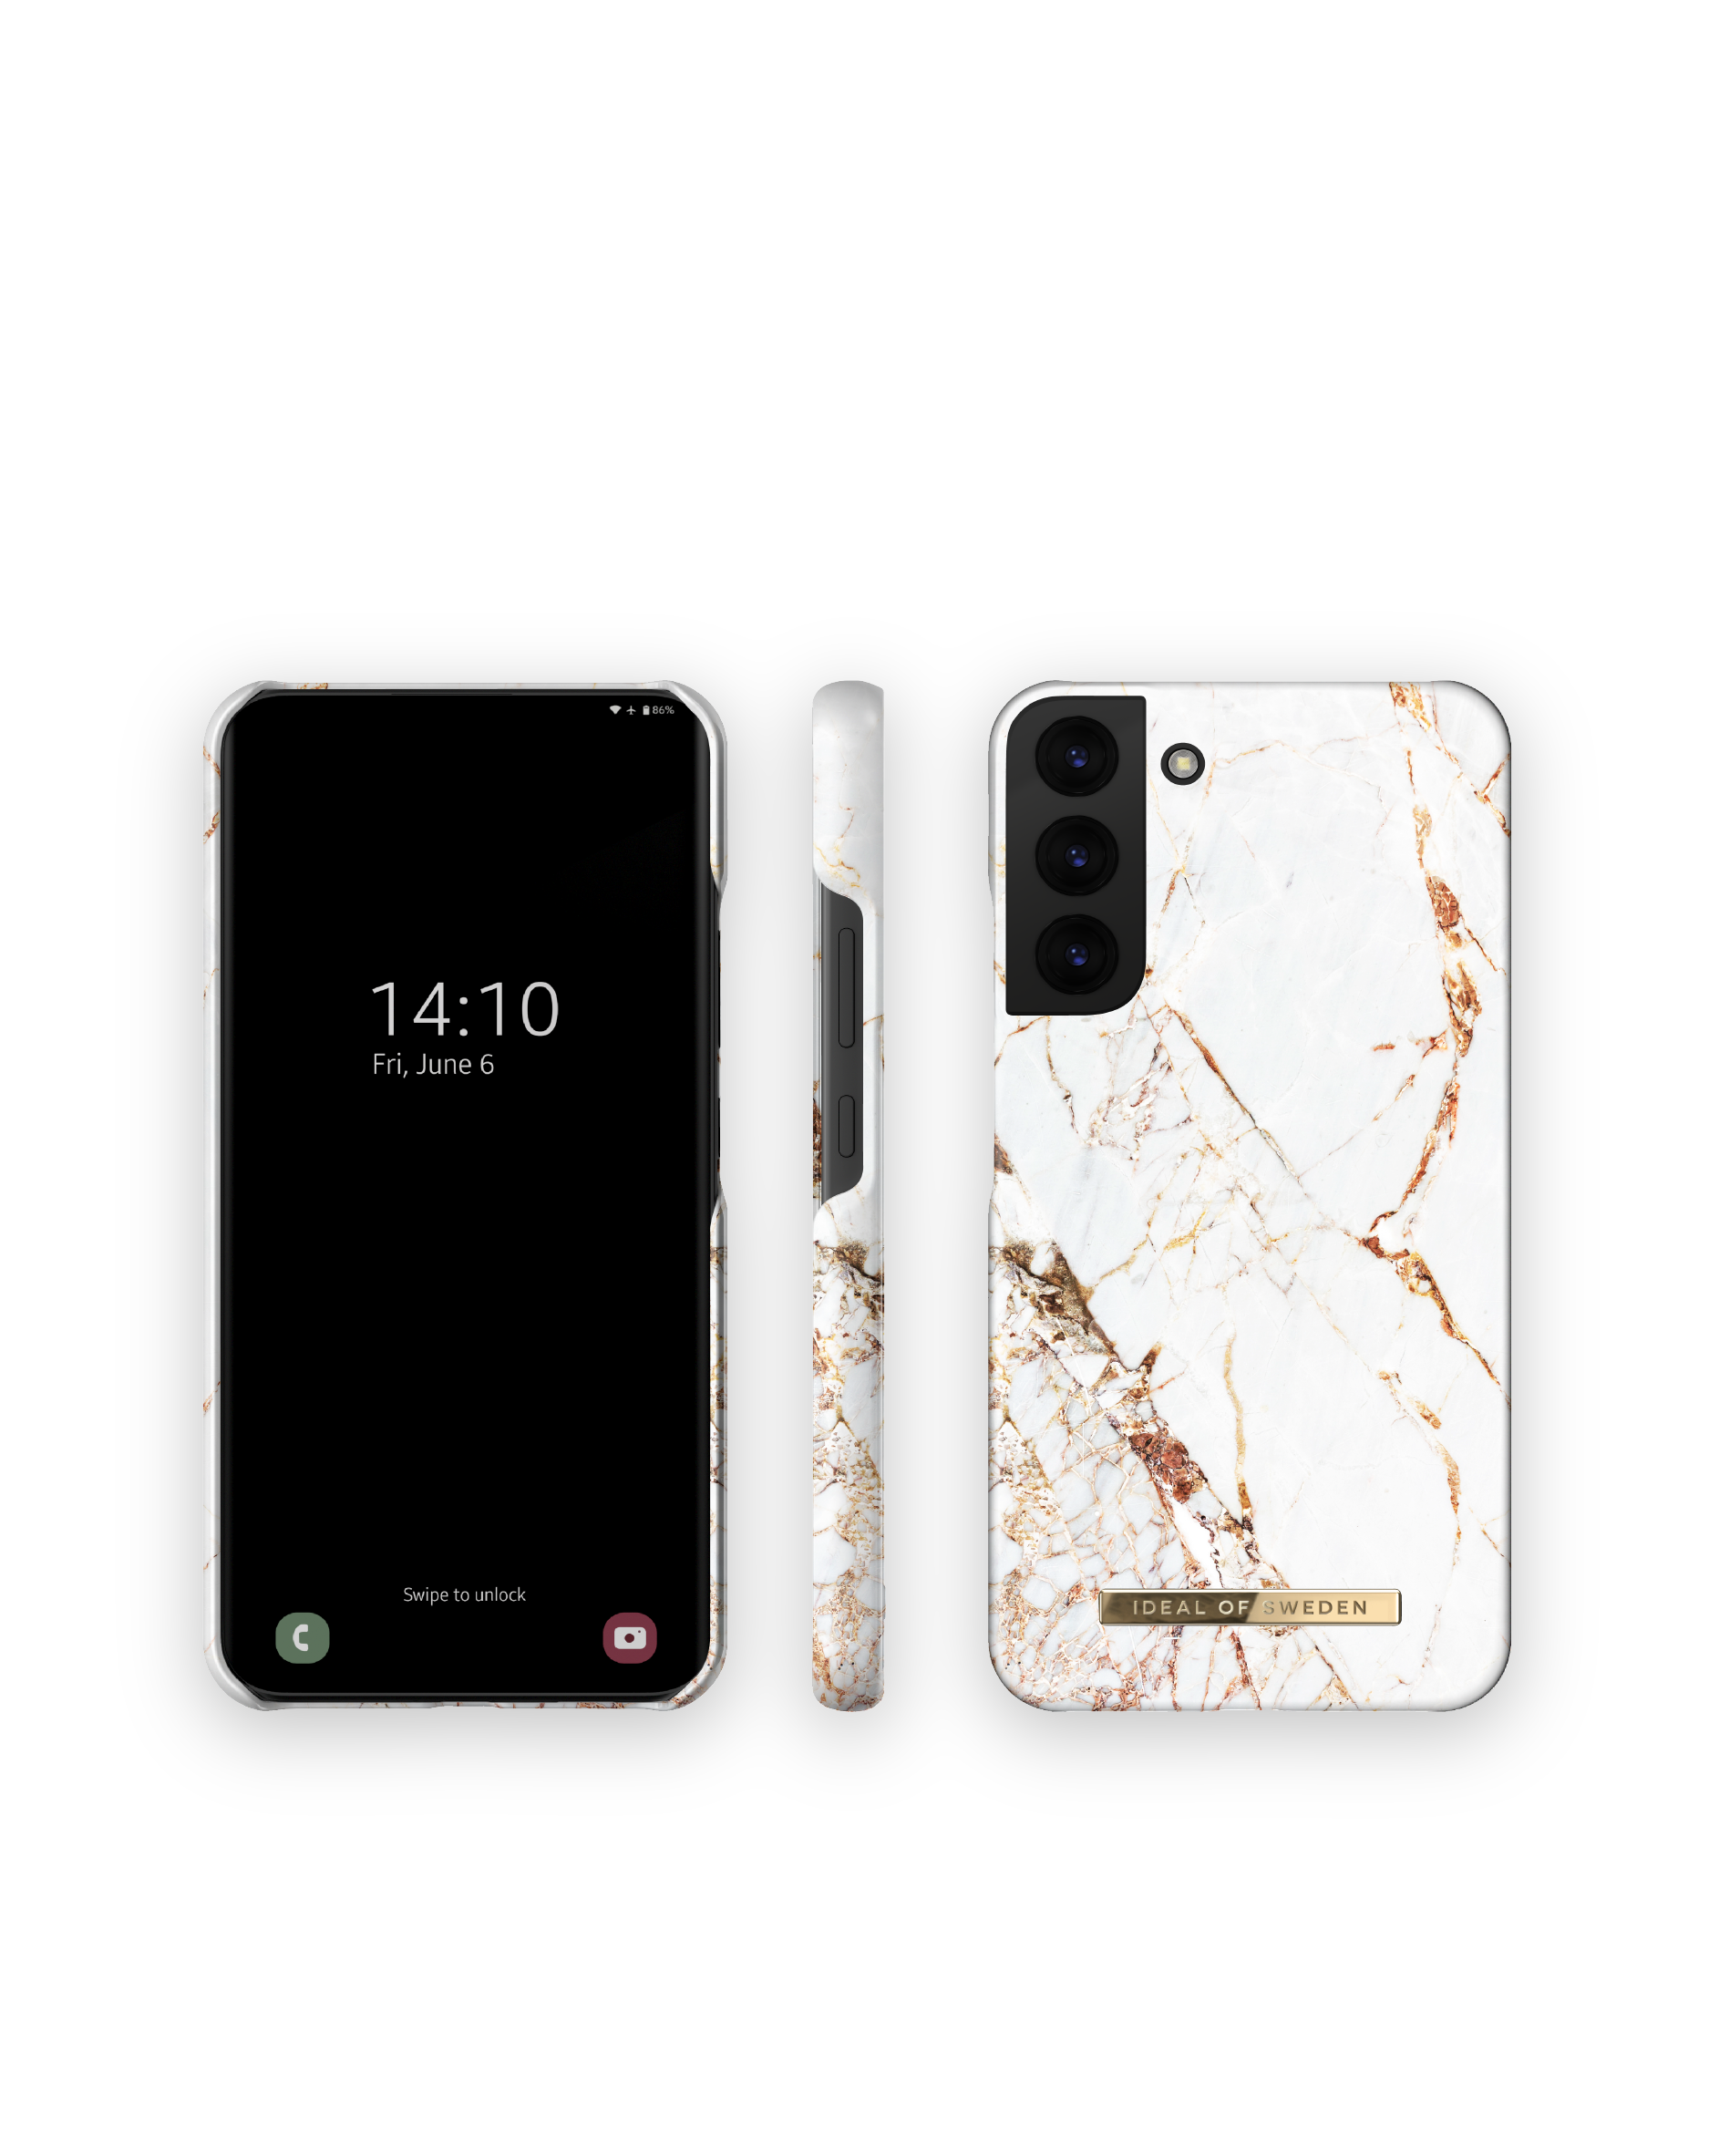 Samsung, Gold SWEDEN OF Backcover, IDFCAW16-S22P-46, S22 IDEAL Galaxy Carrara Plus,